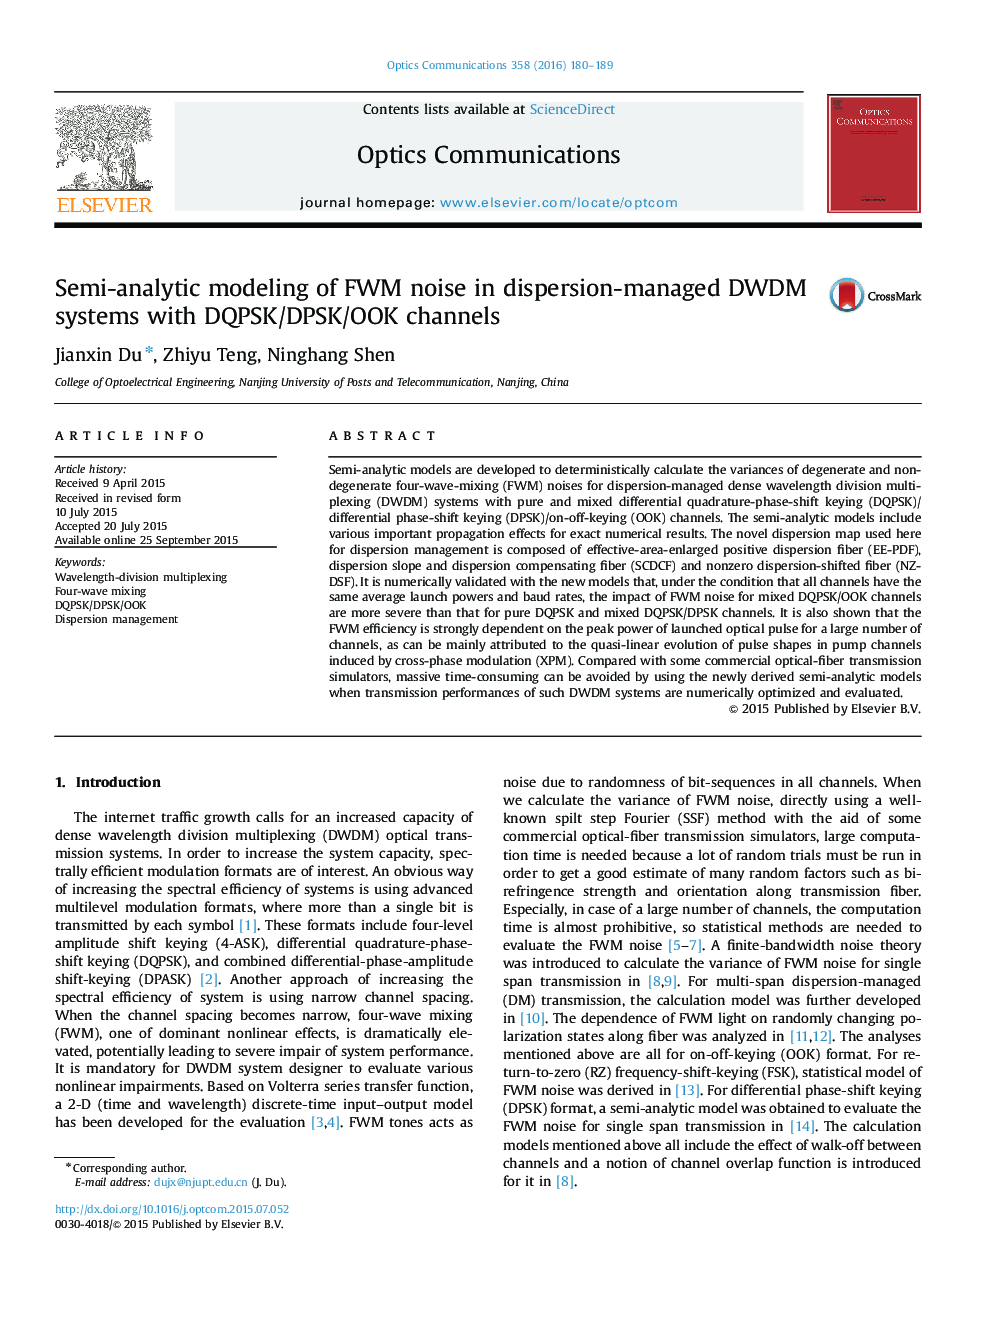 Semi-analytic modeling of FWM noise in dispersion-managed DWDM systems with DQPSK/DPSK/OOK channels